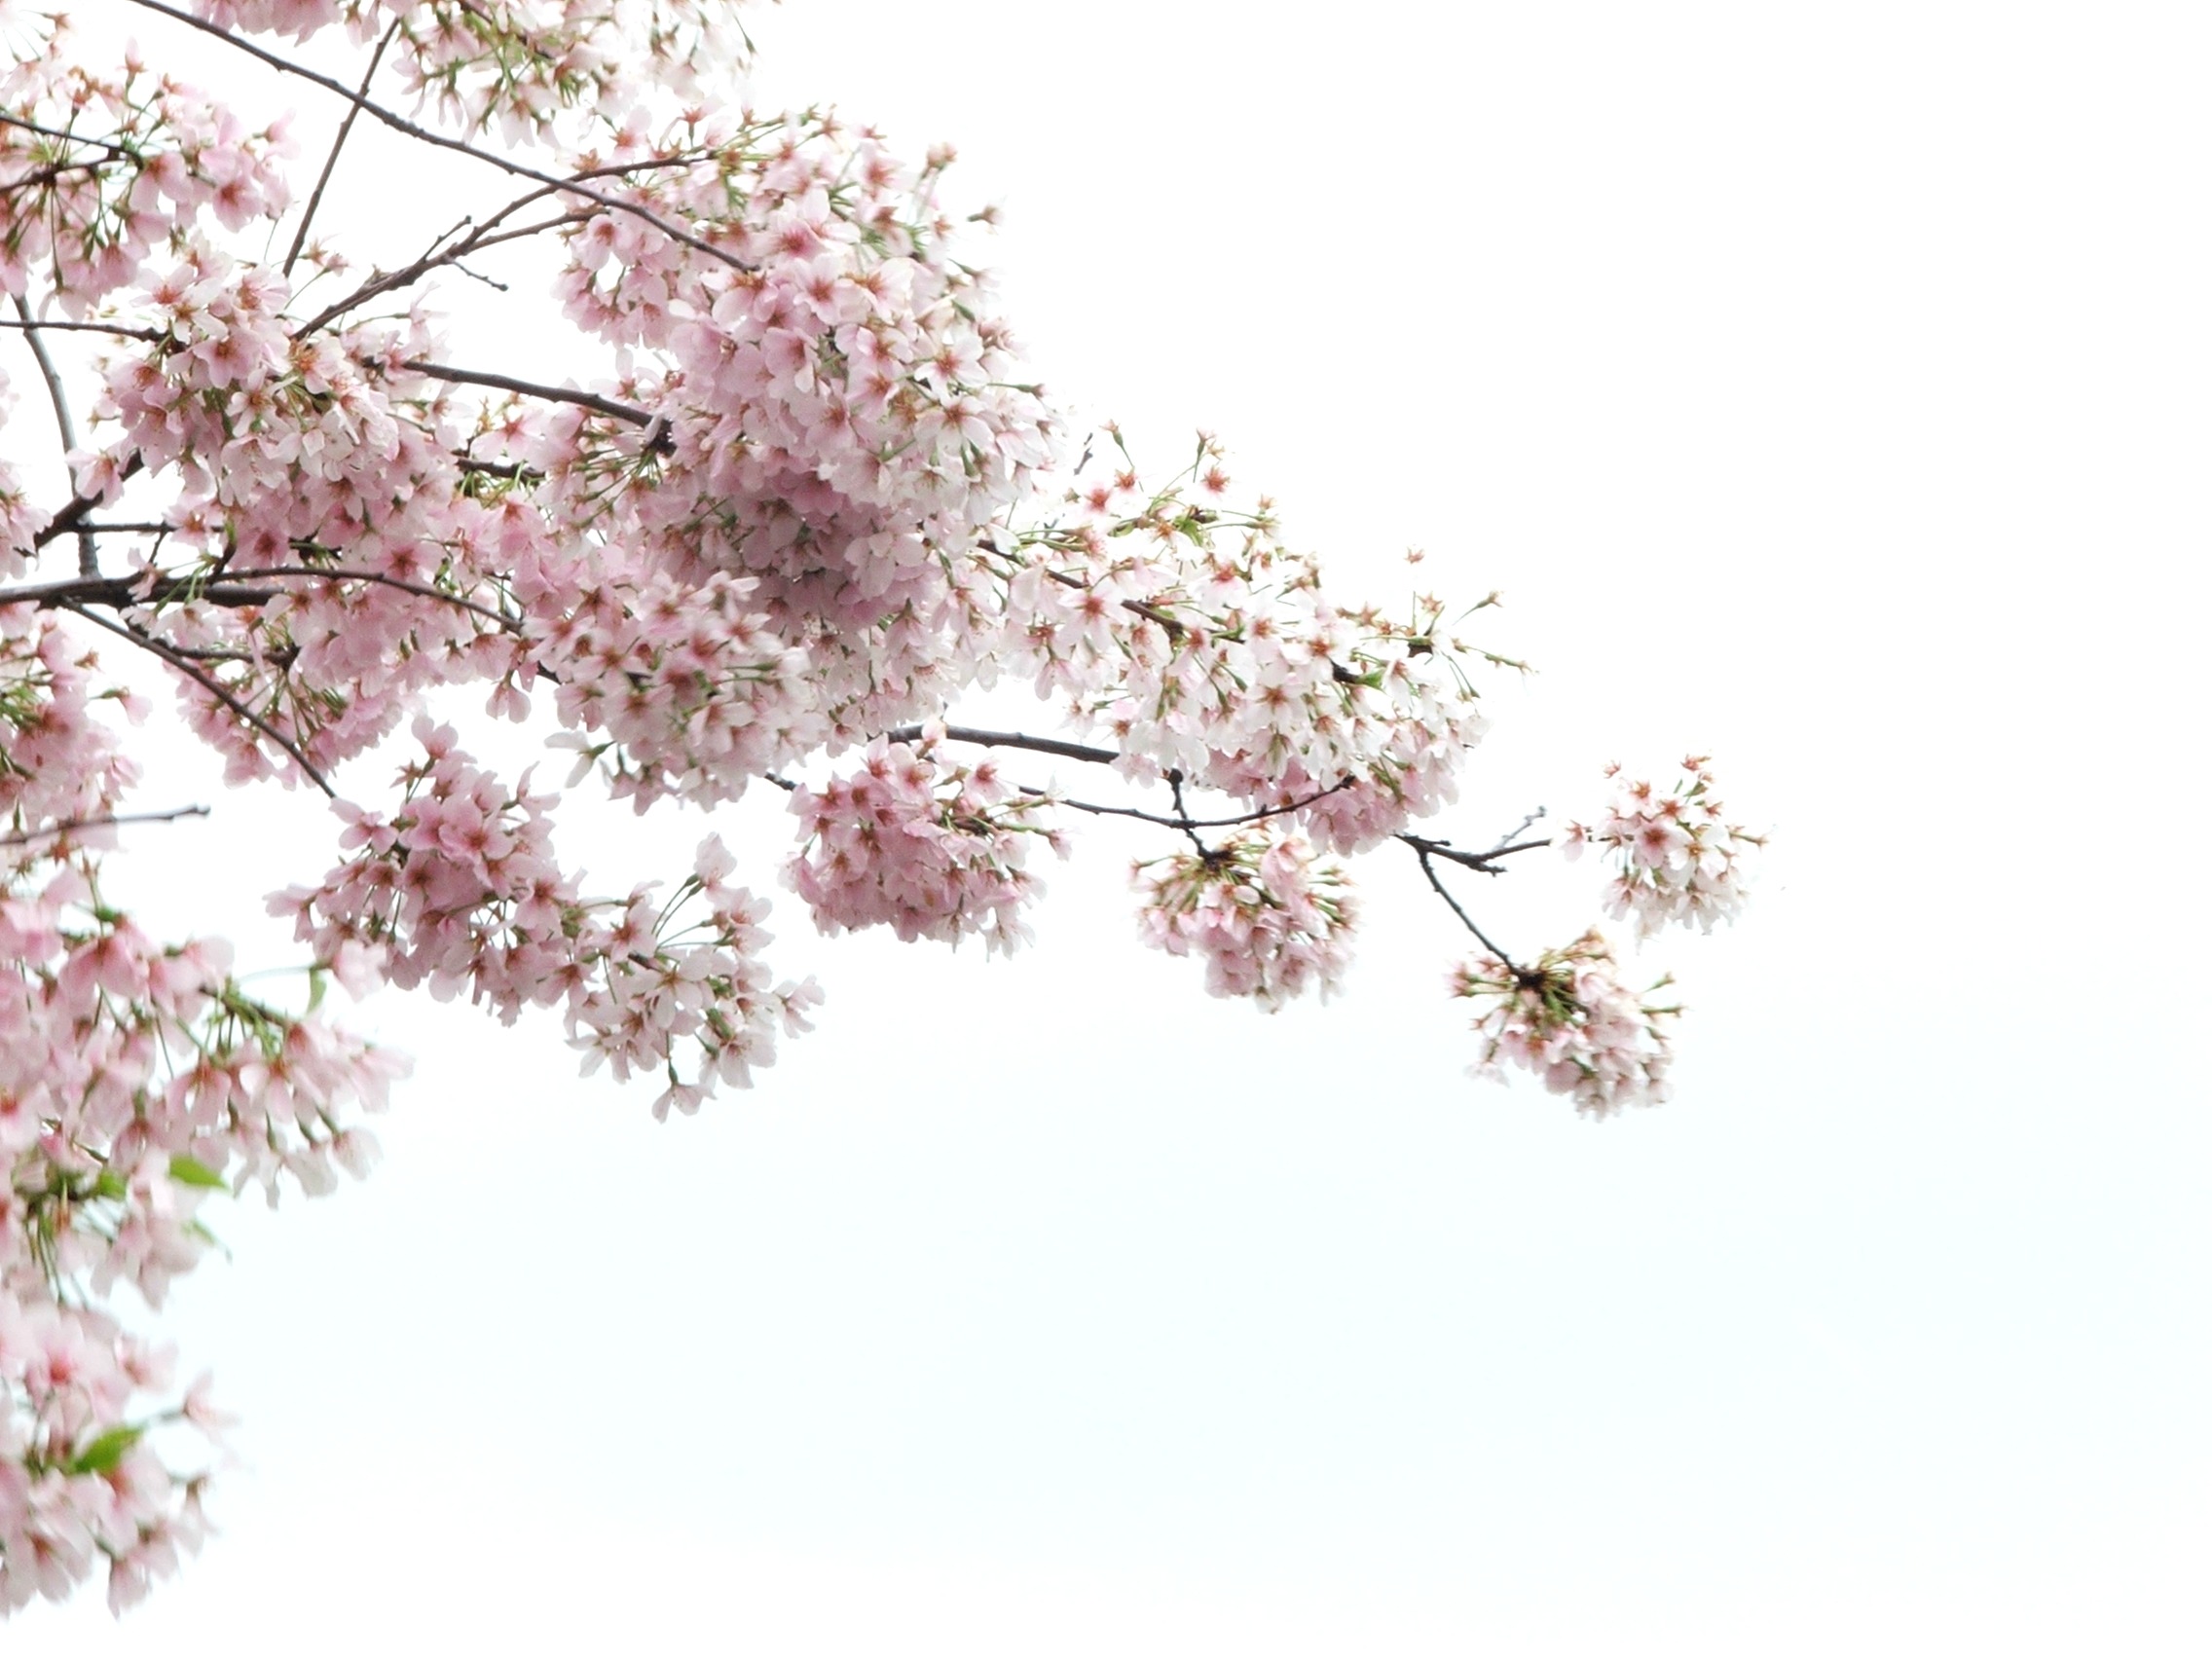 Cherry Blossoms 100th Anniversary by HatterSisters on DeviantArt